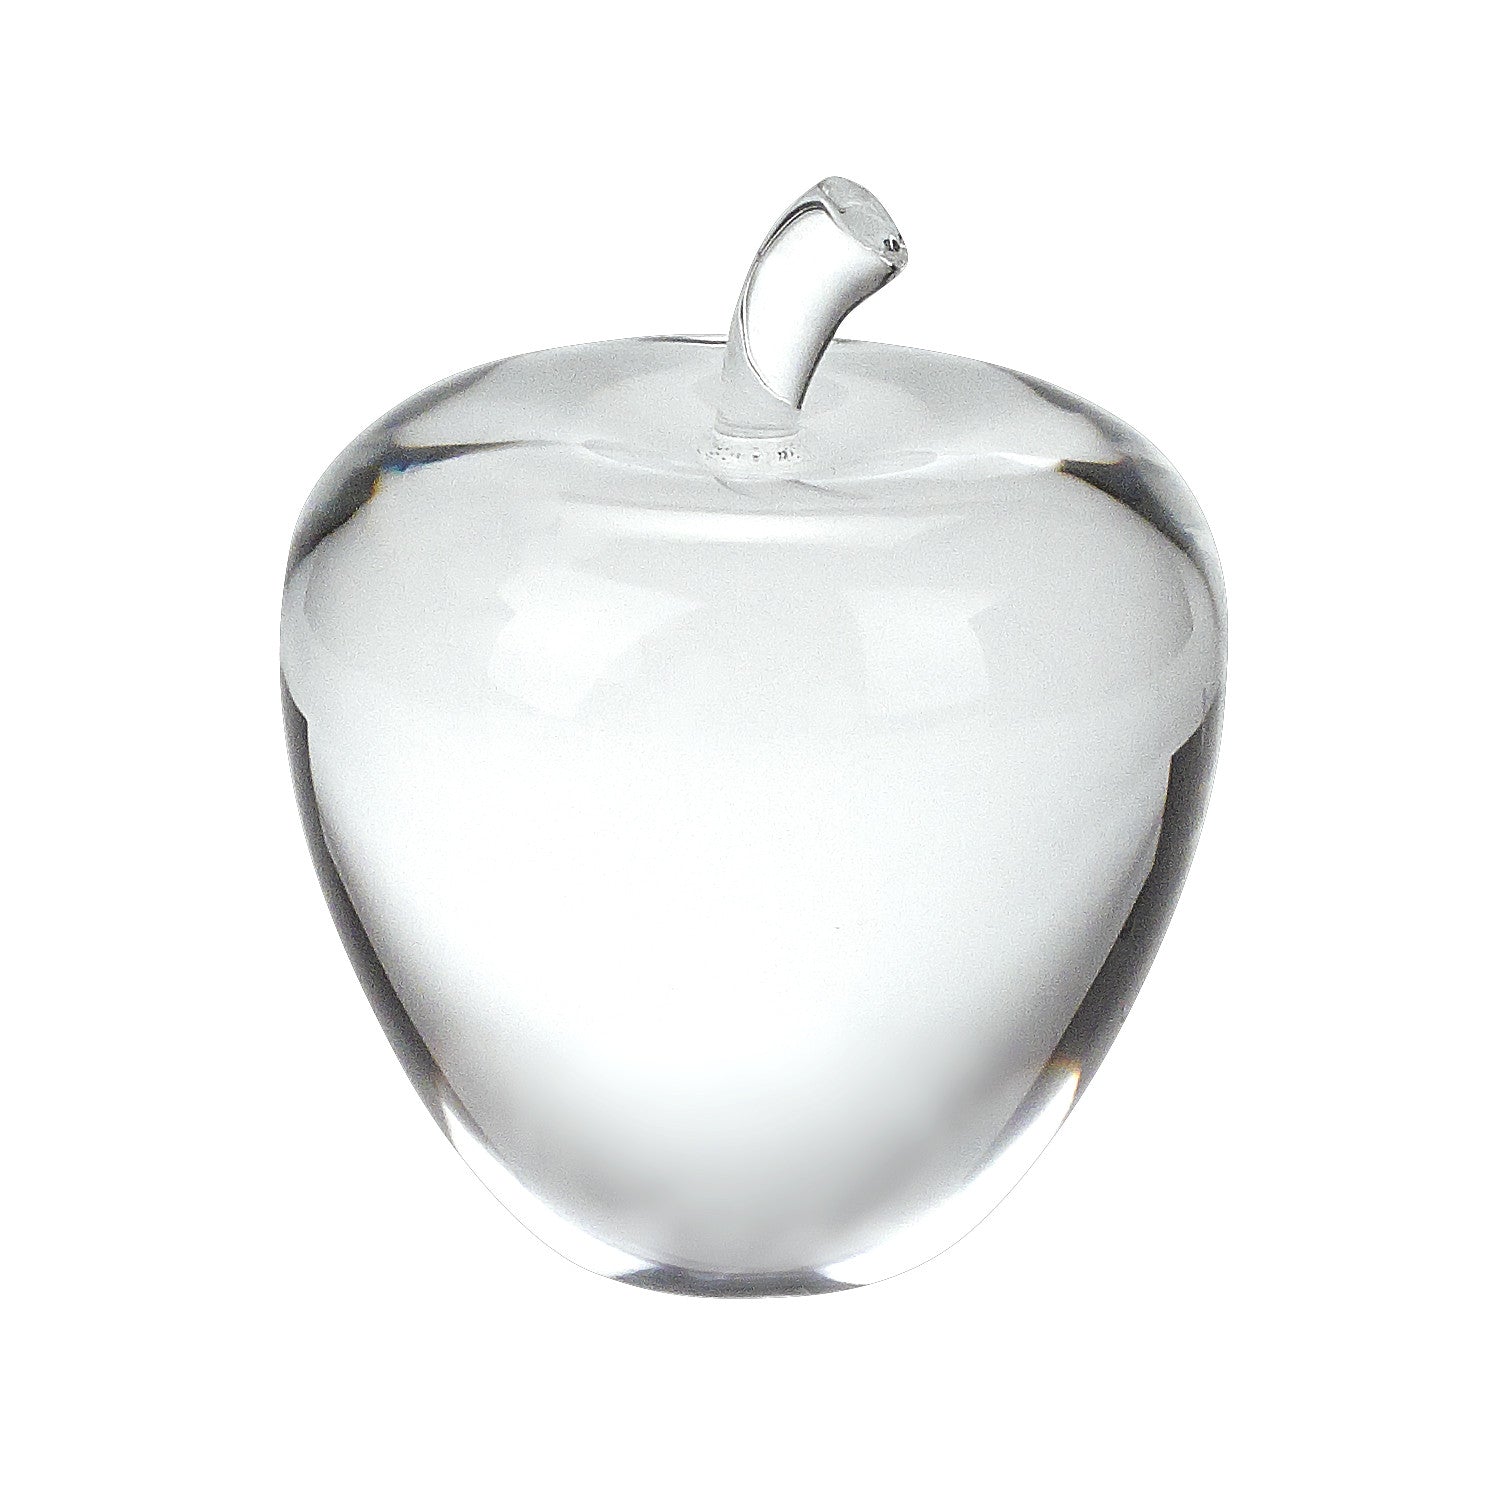 4" Clear Crystal Apple Paperweight Tabletop Sculpture